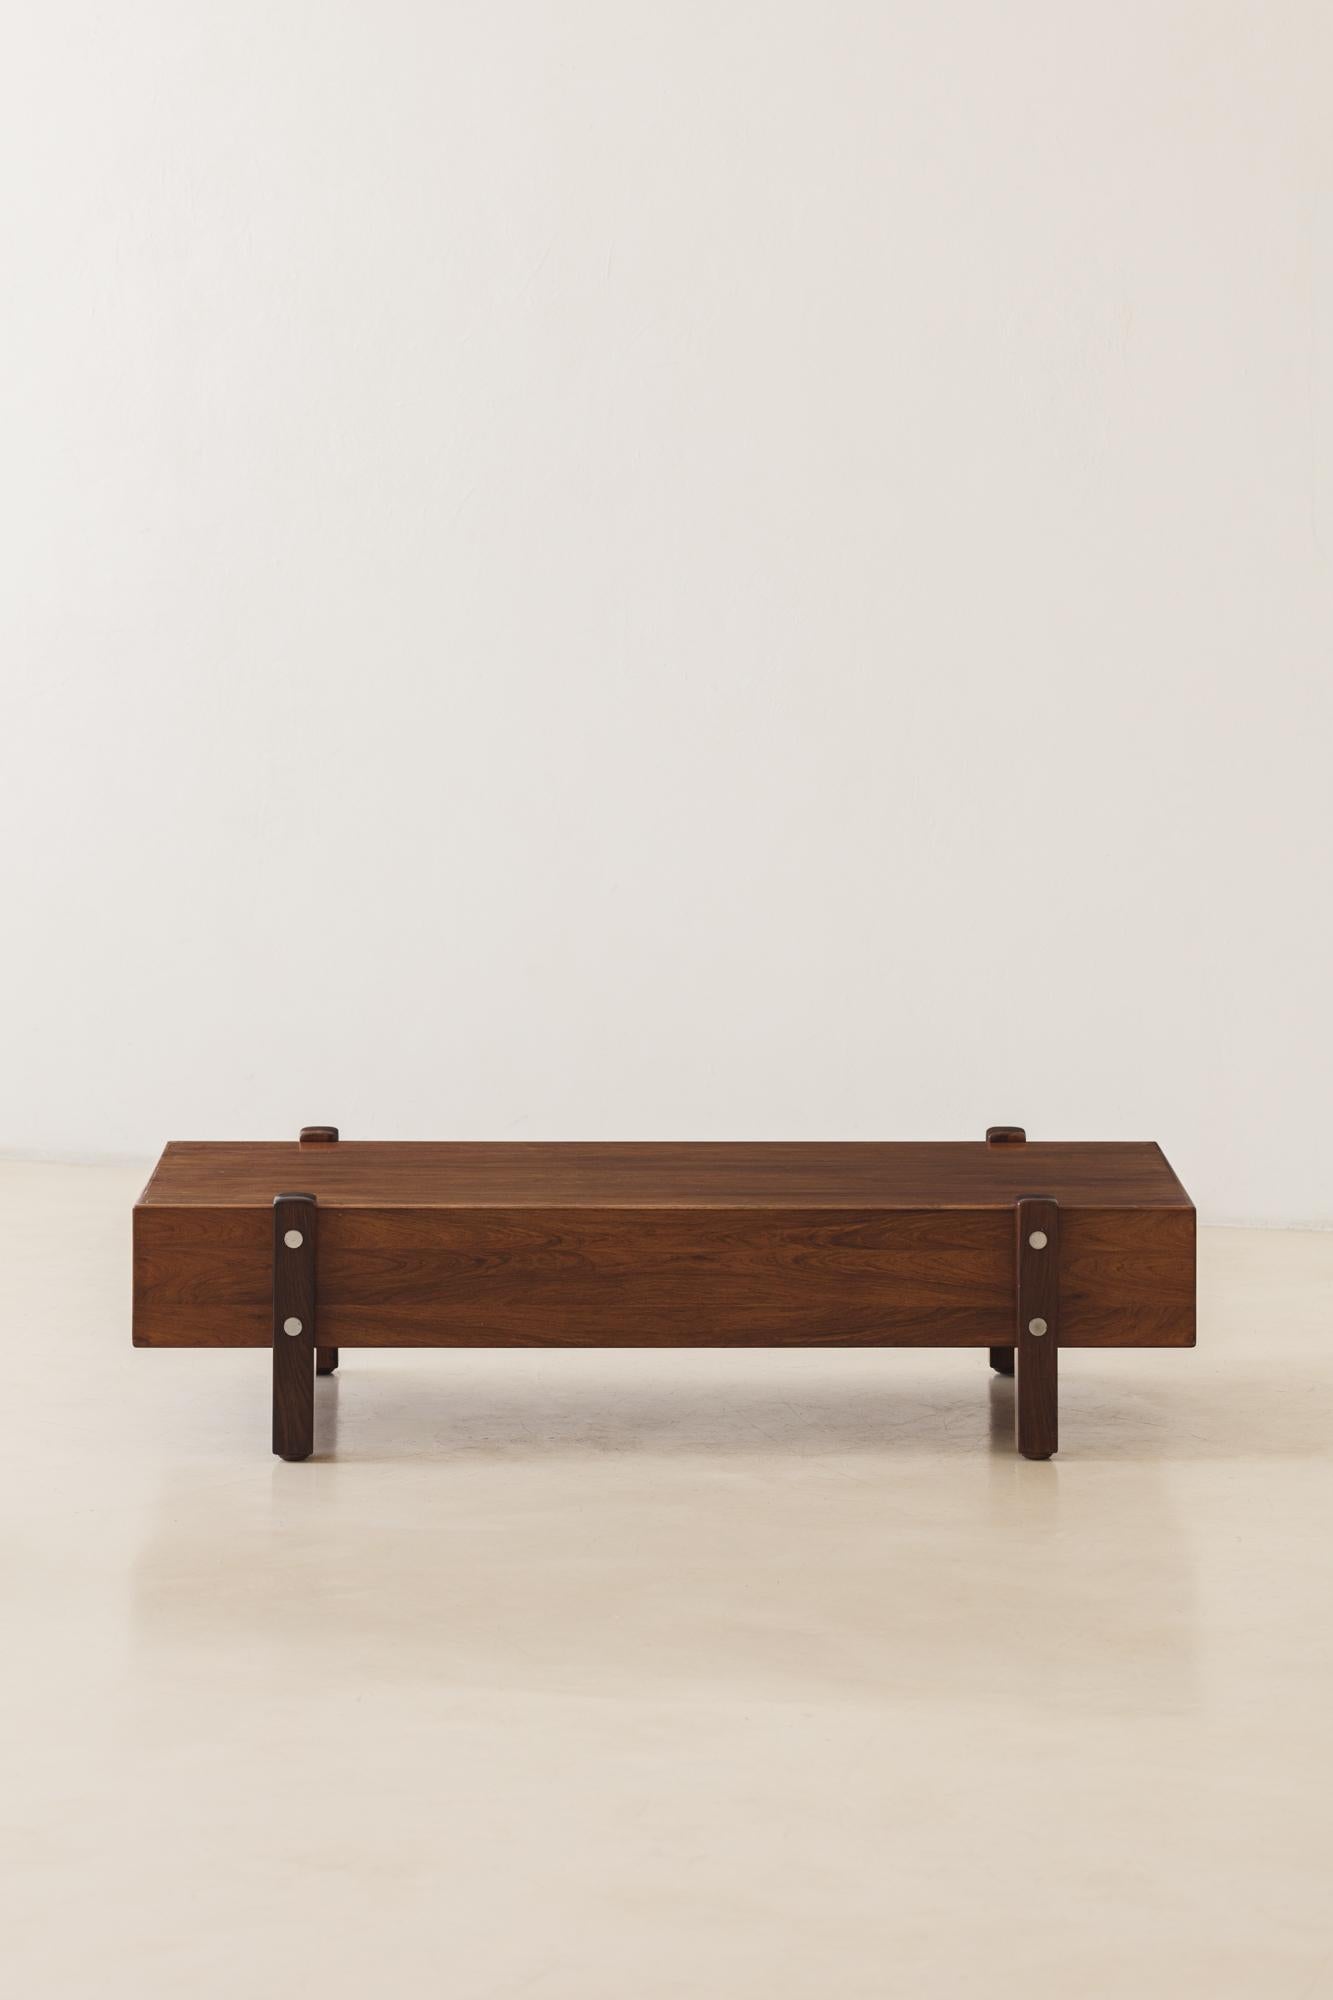 The Eleh bench is a furniture piece from the 1960s designed by Sergio Rodrigues (1914-2012). Its structure is composed of a veneered wood box covered with Rosewood veneers and four solid Rosewood feet with chromed details. Like many designers of